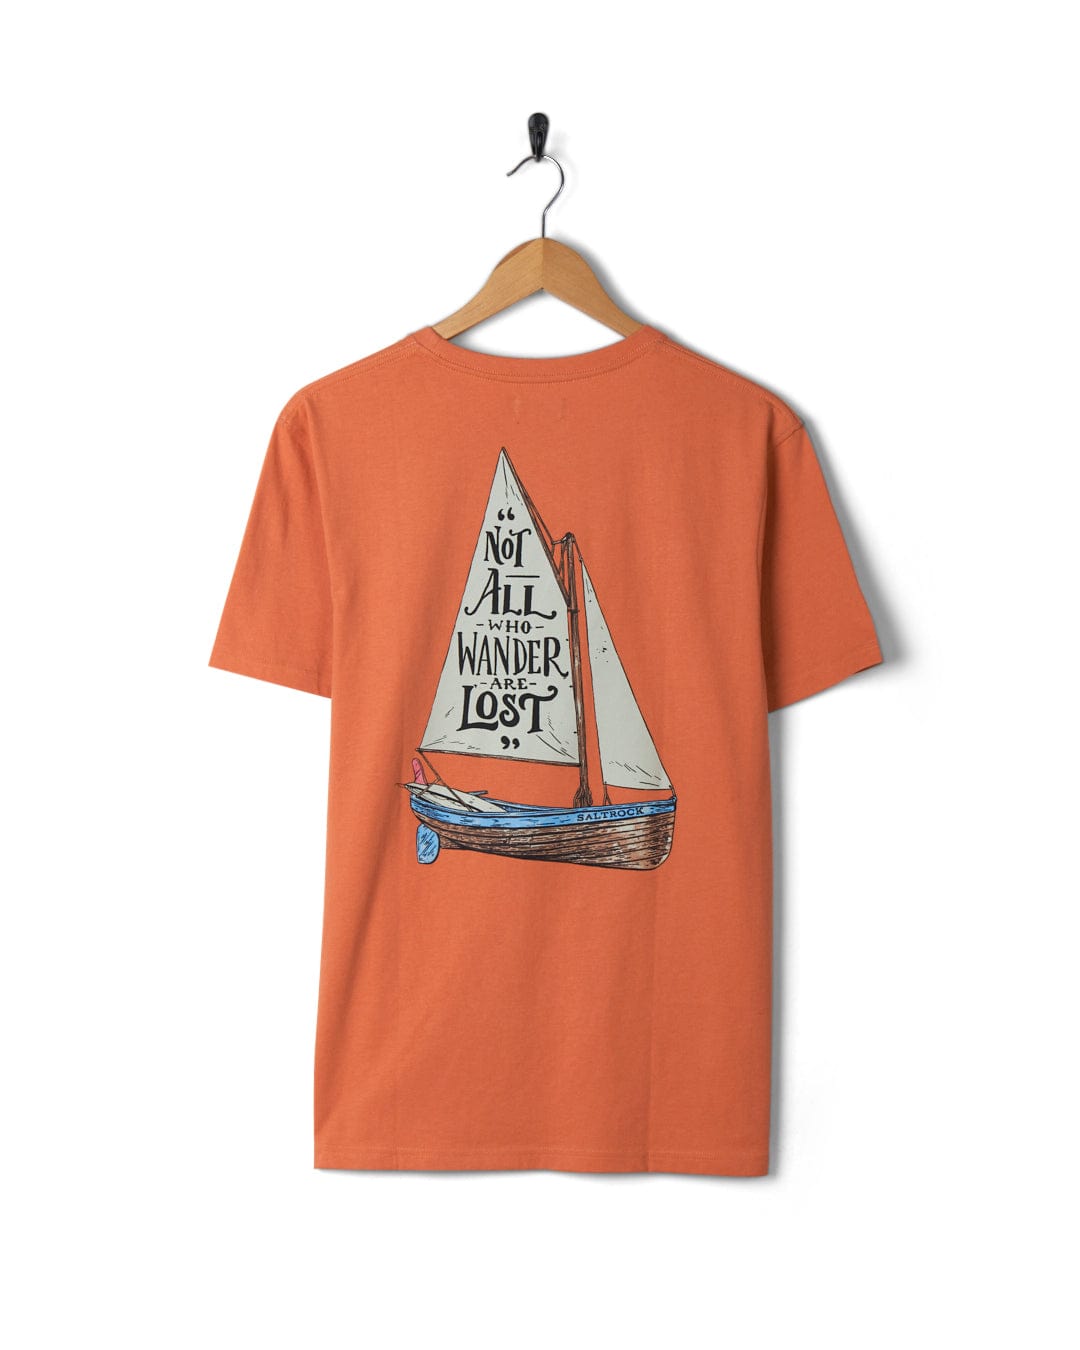 A Lost Ships graphic tee with Saltrock branding. Made of Cotton/Polyester blend.